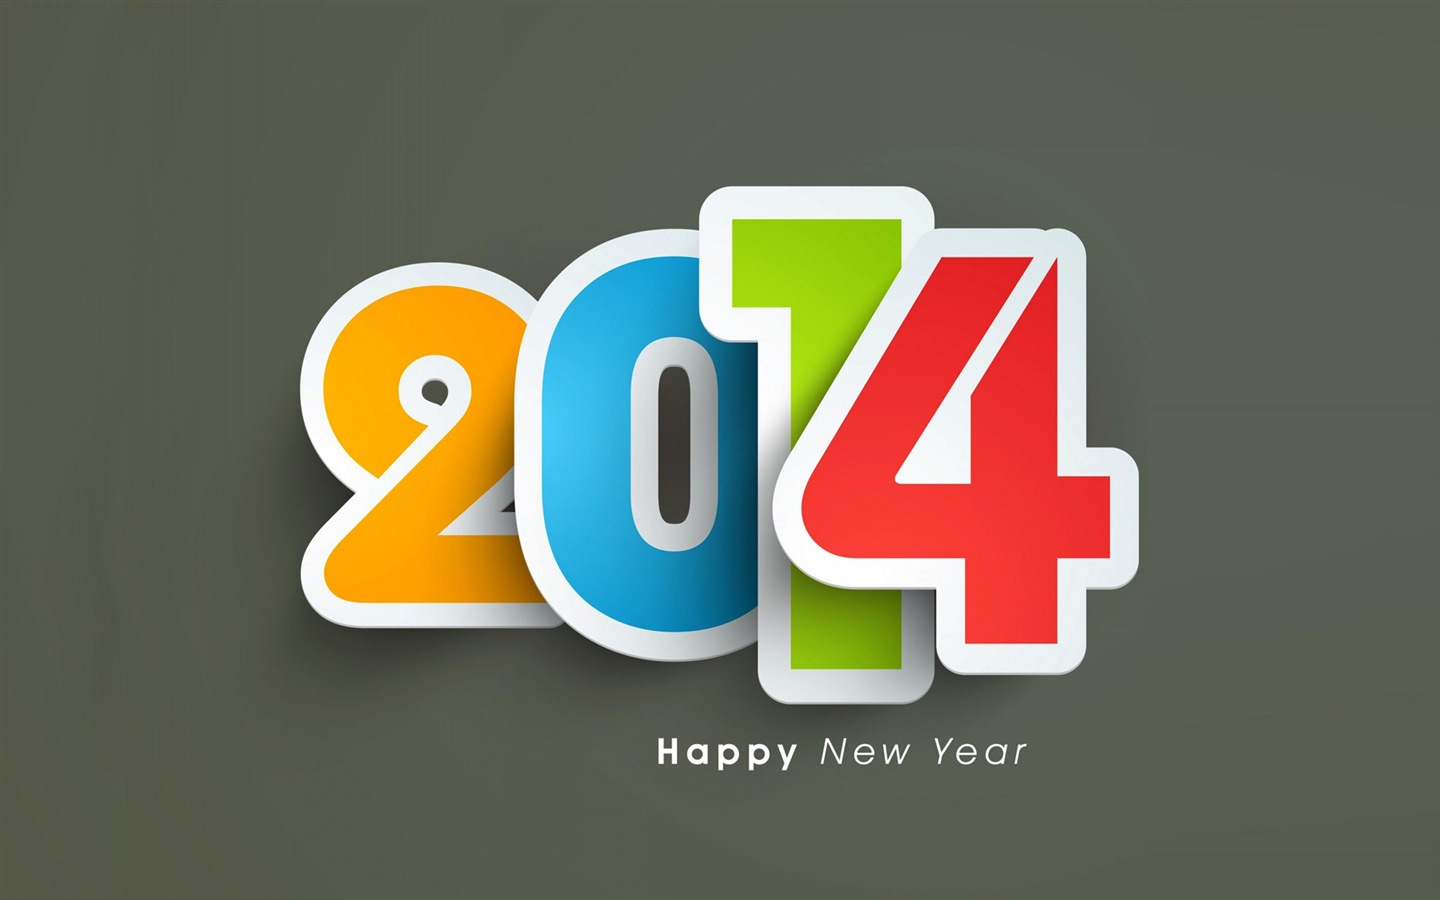 2014 New Year Theme HD Wallpapers (2) #9 - 1440x900